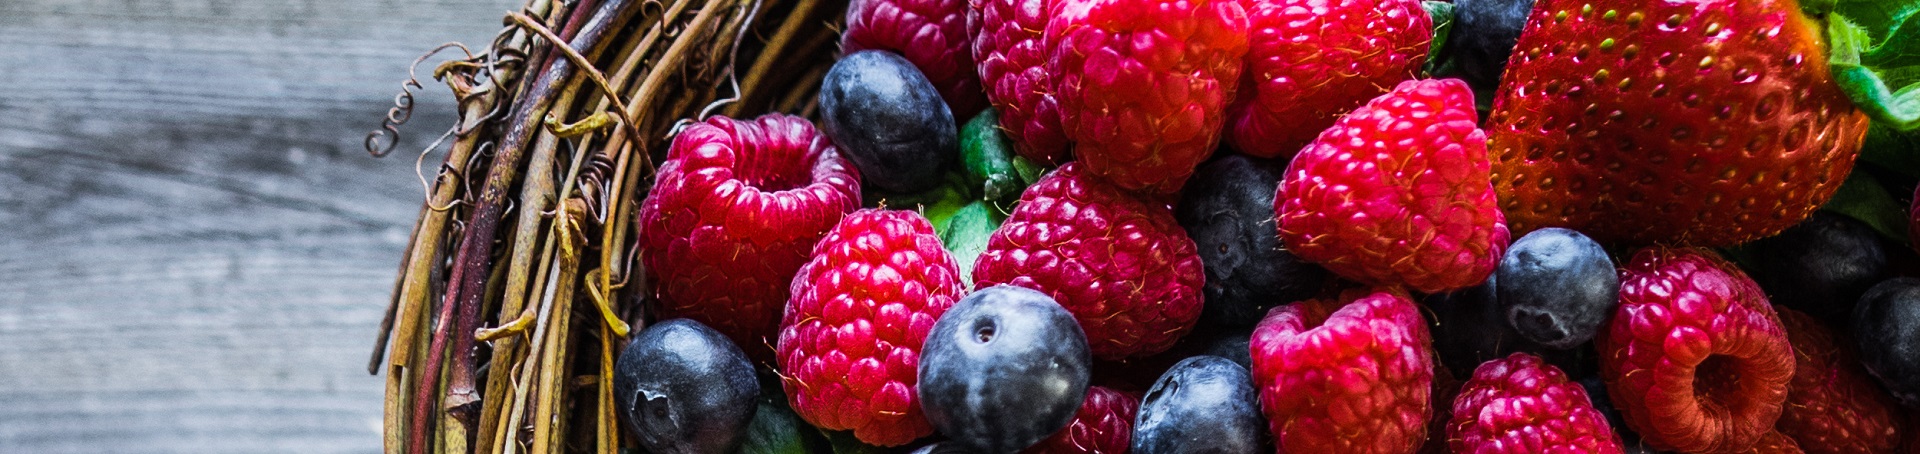 berries are foods that lower blood sugar